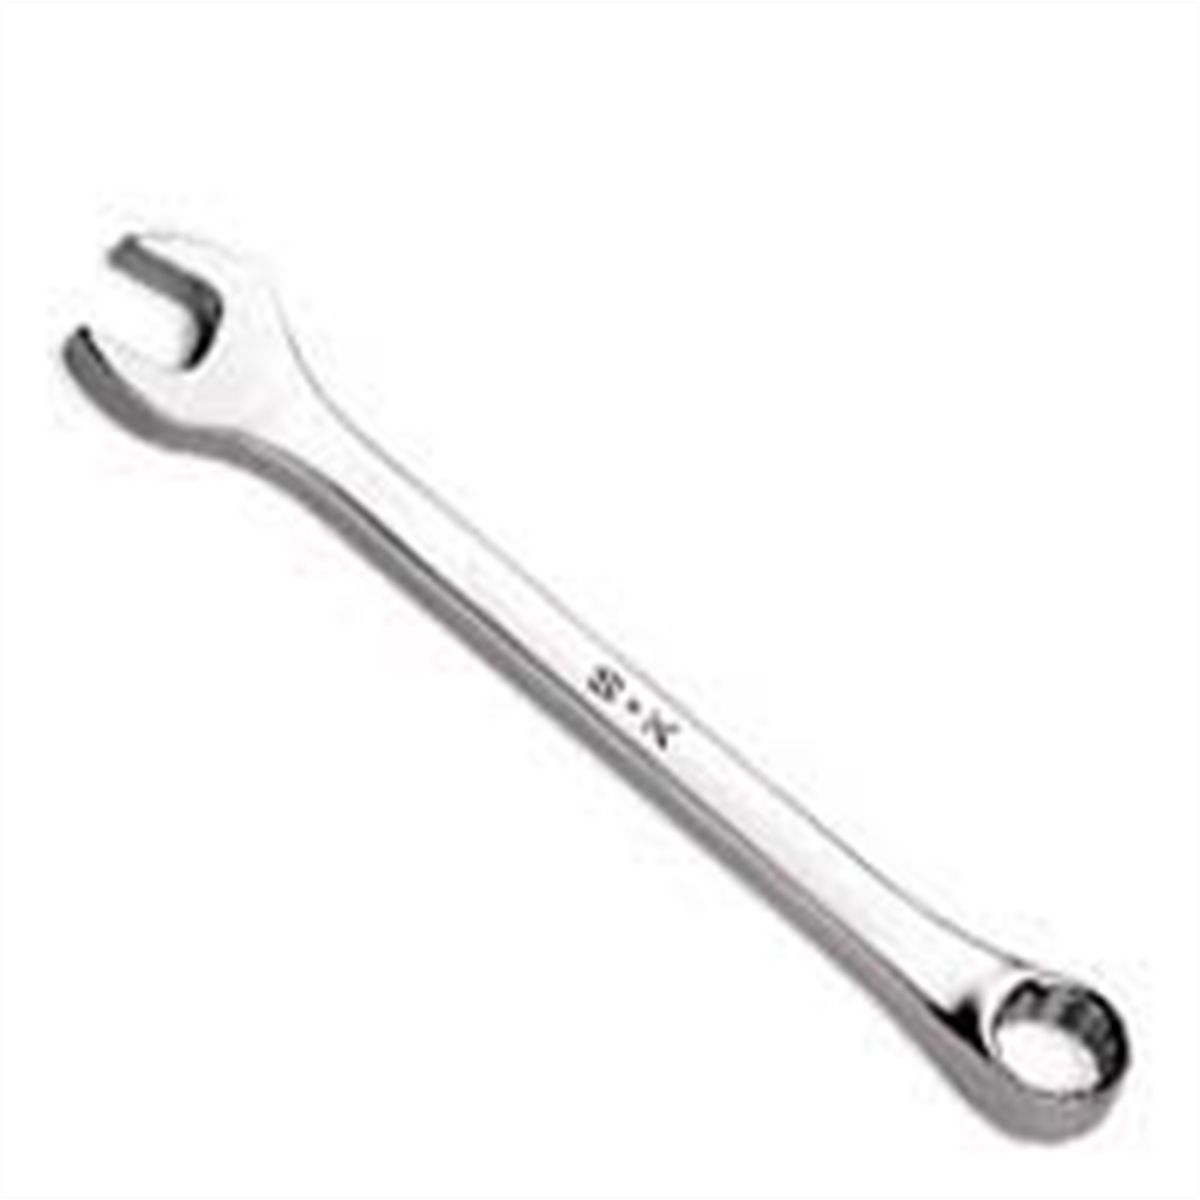 SuperKrome(R) 6 Pt Fractional Combination Wrench - 11/16 In